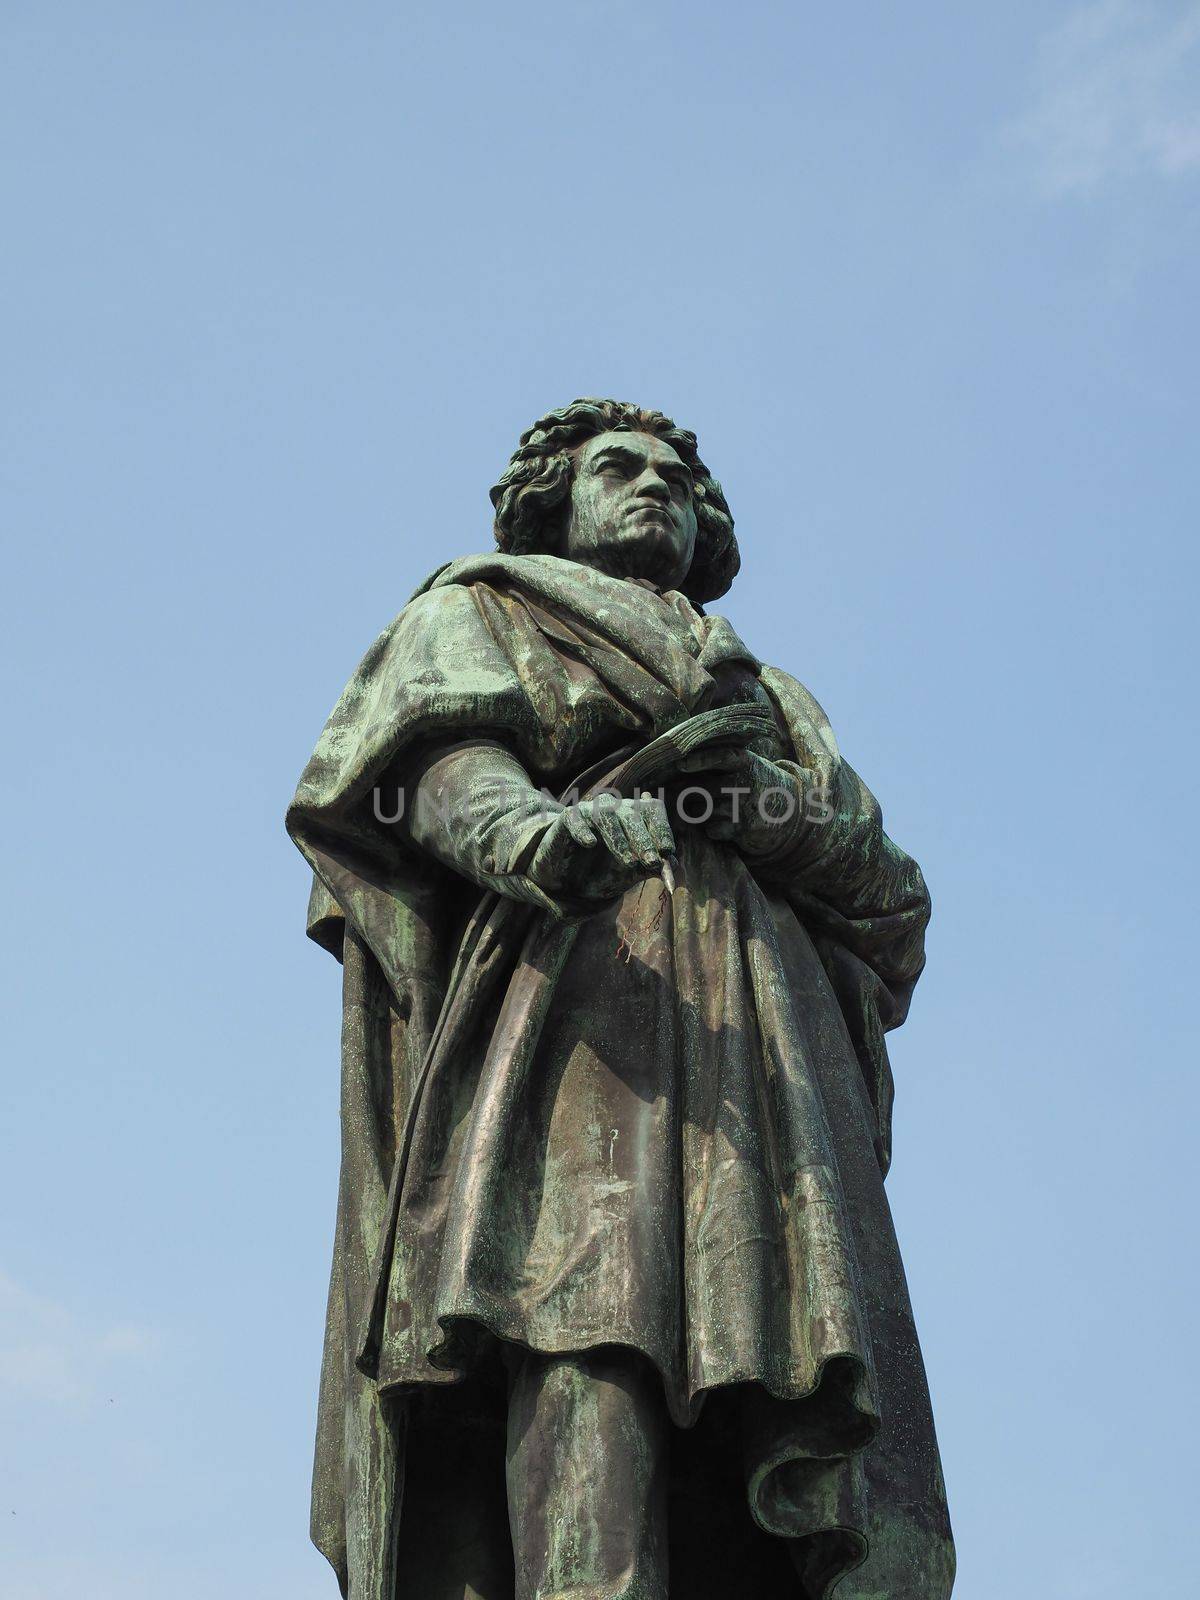 Beethoven Denkmal (unveiled 1845) bronze statue in Bonn, Germany